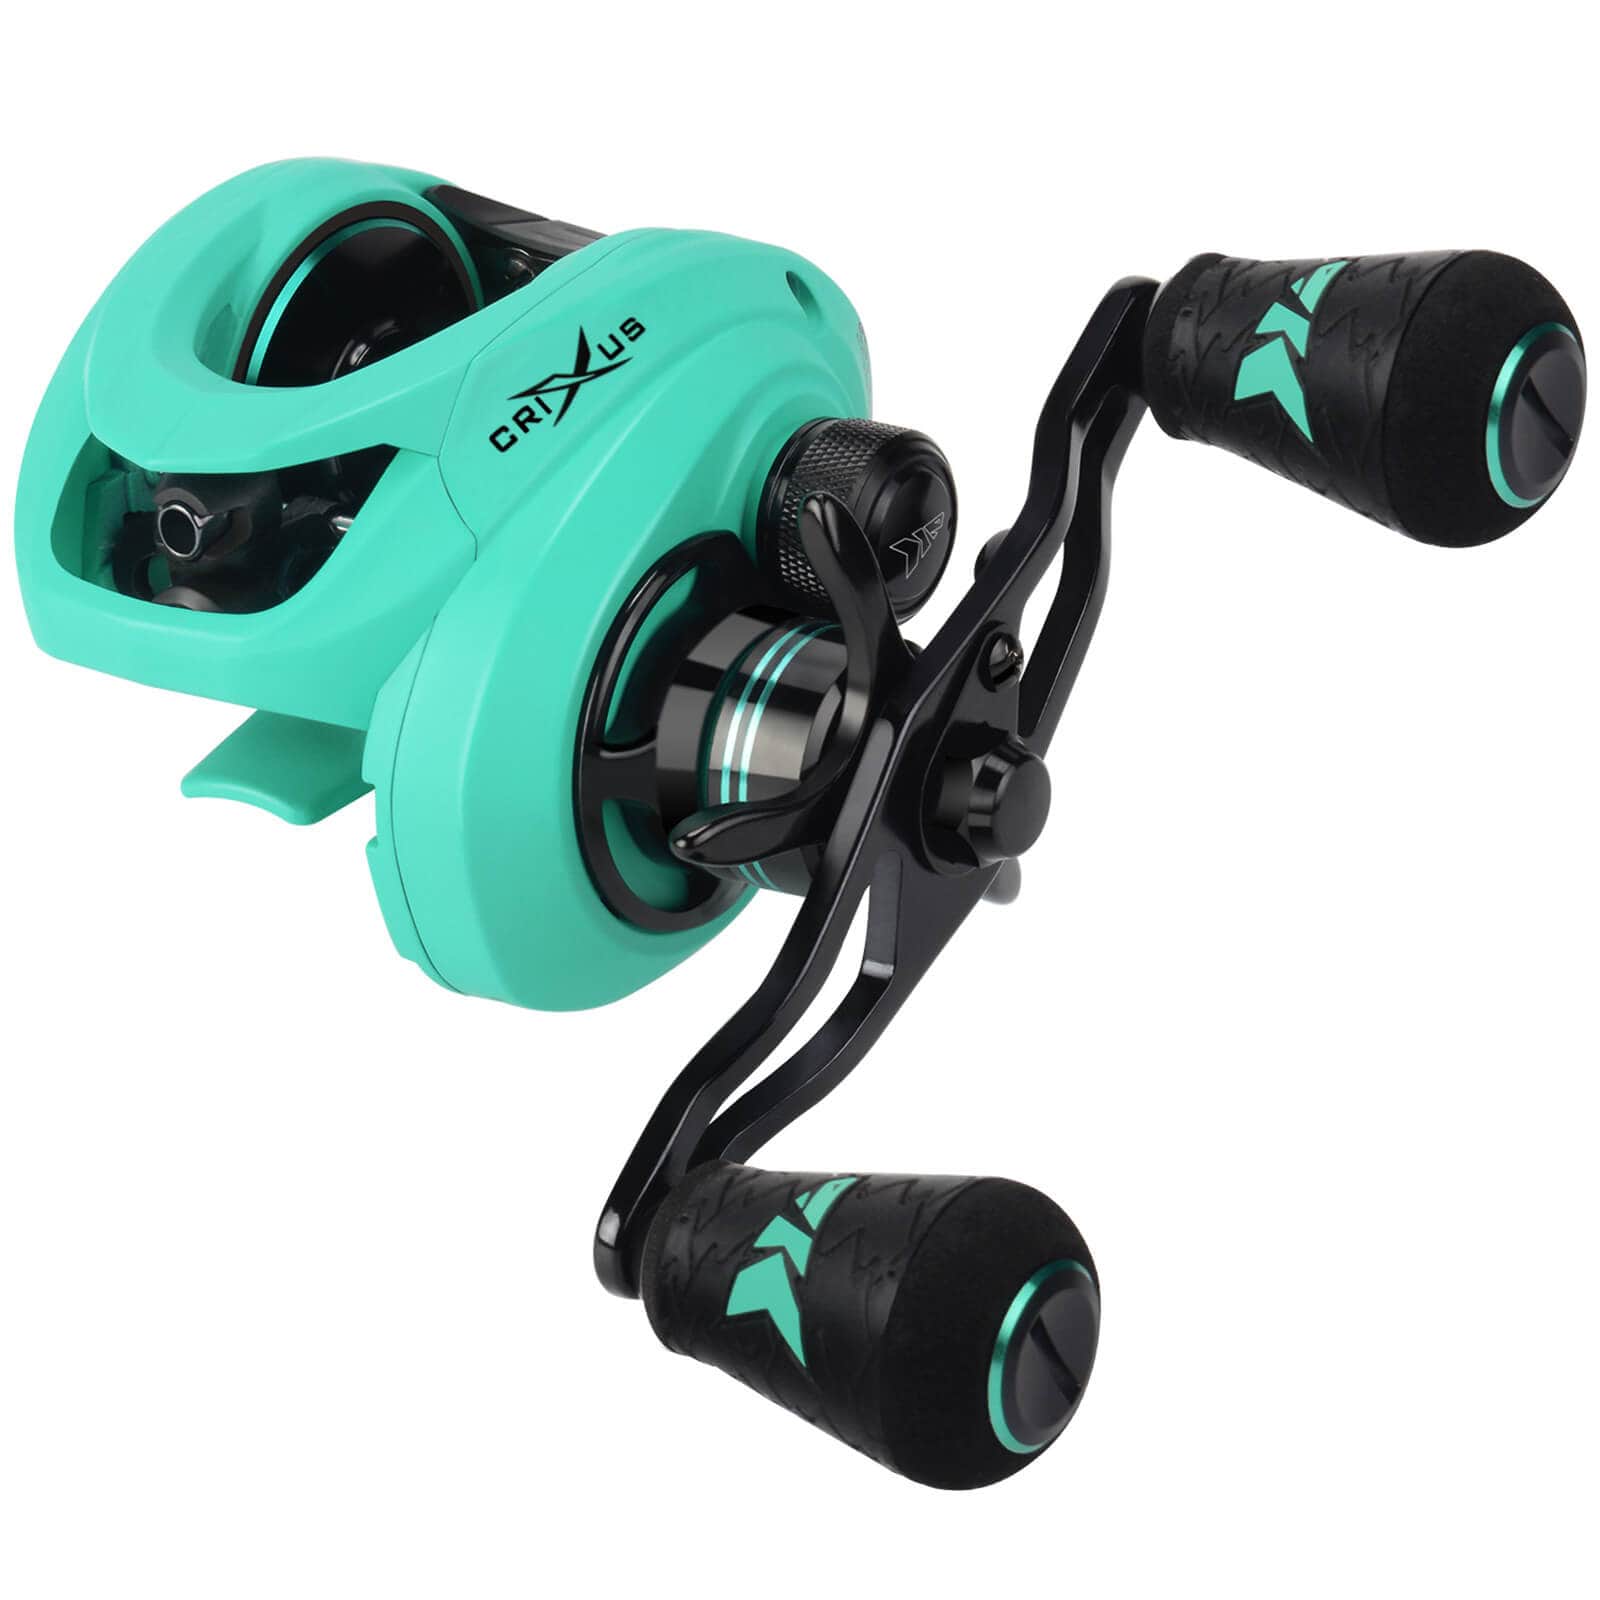 Line Recommendations for my first Baitcaster? KastKing Crixus reel and rod,  fast action Medium-Heavy. Ive used Braid to Flouro leader on my spinning  rods, and heard cheap mono would be best for